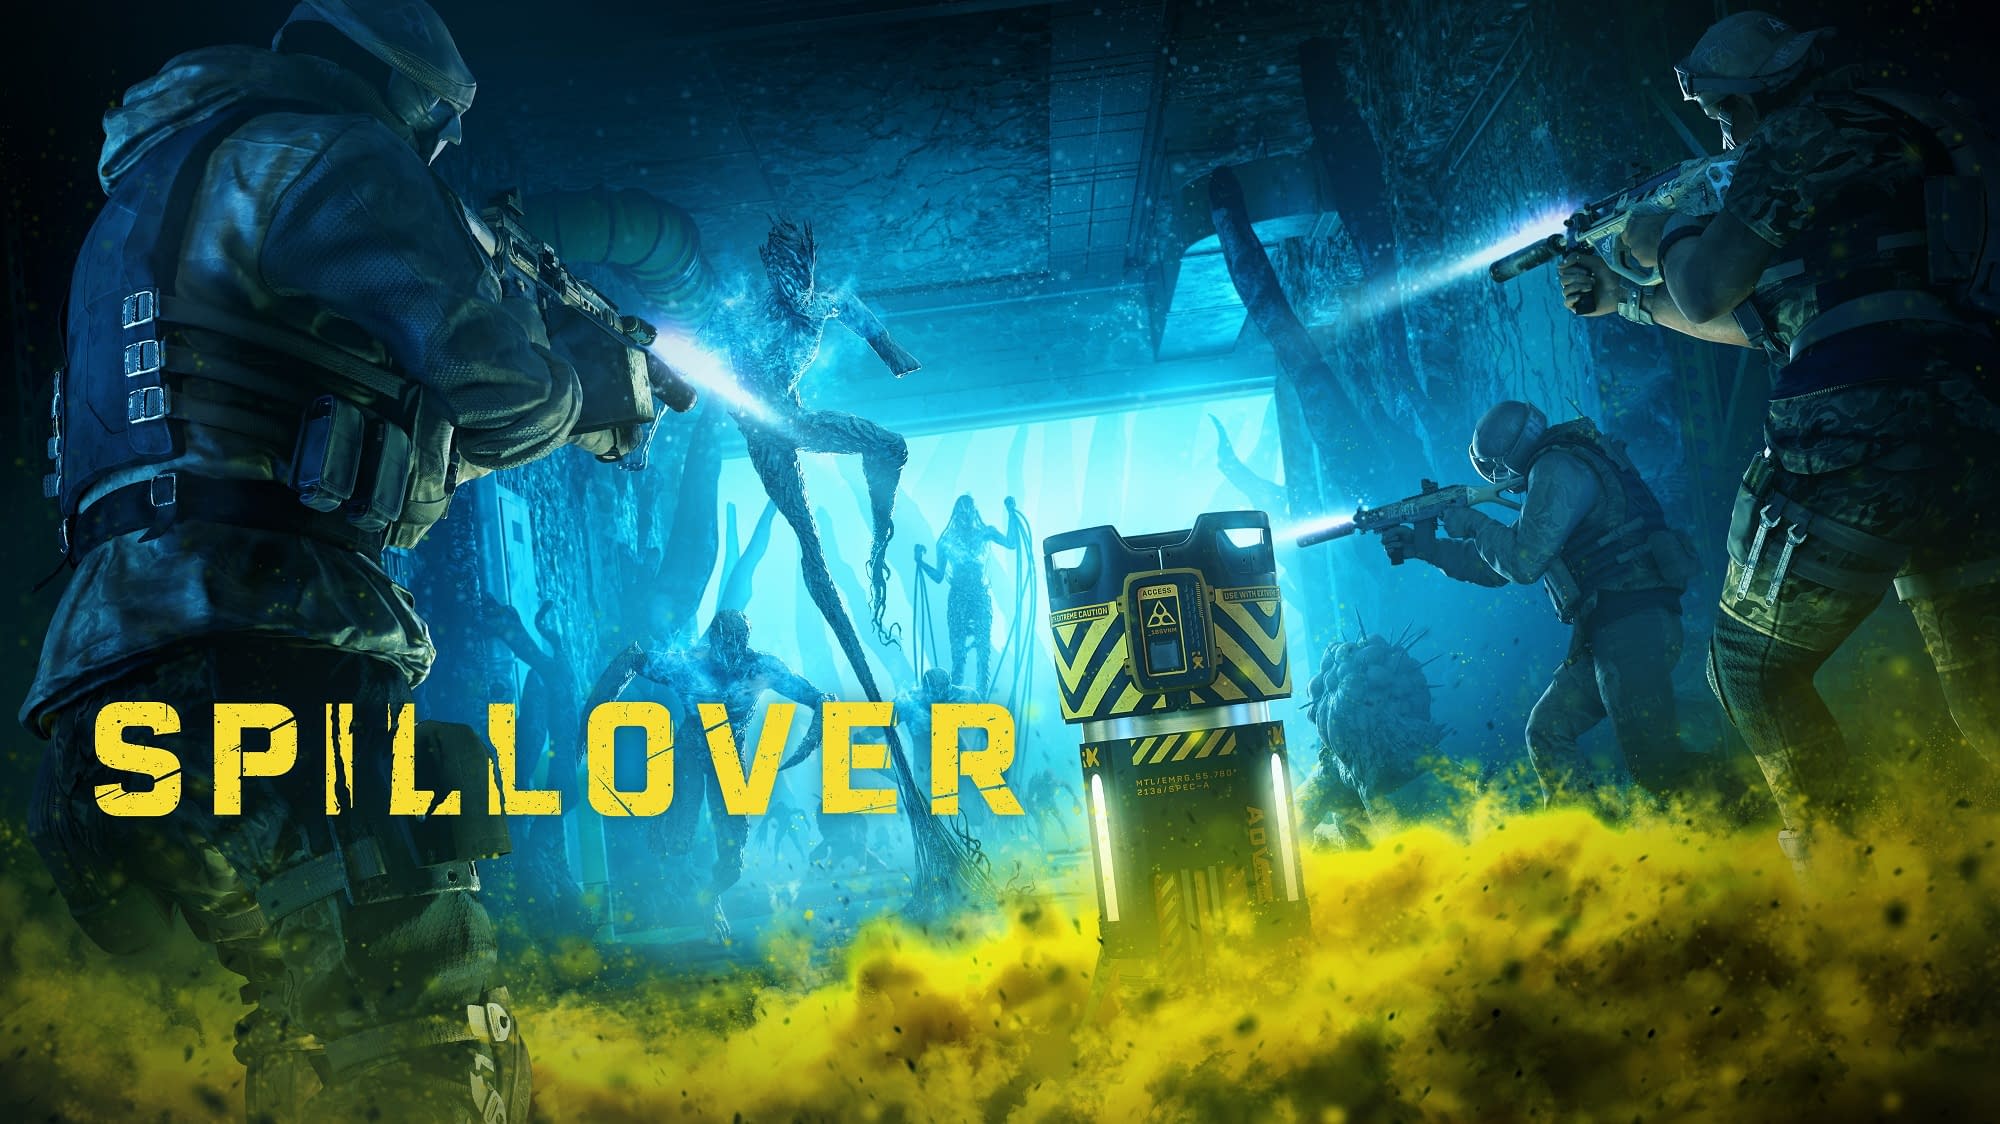 Rainbow Six Extract: Spillover goes live today